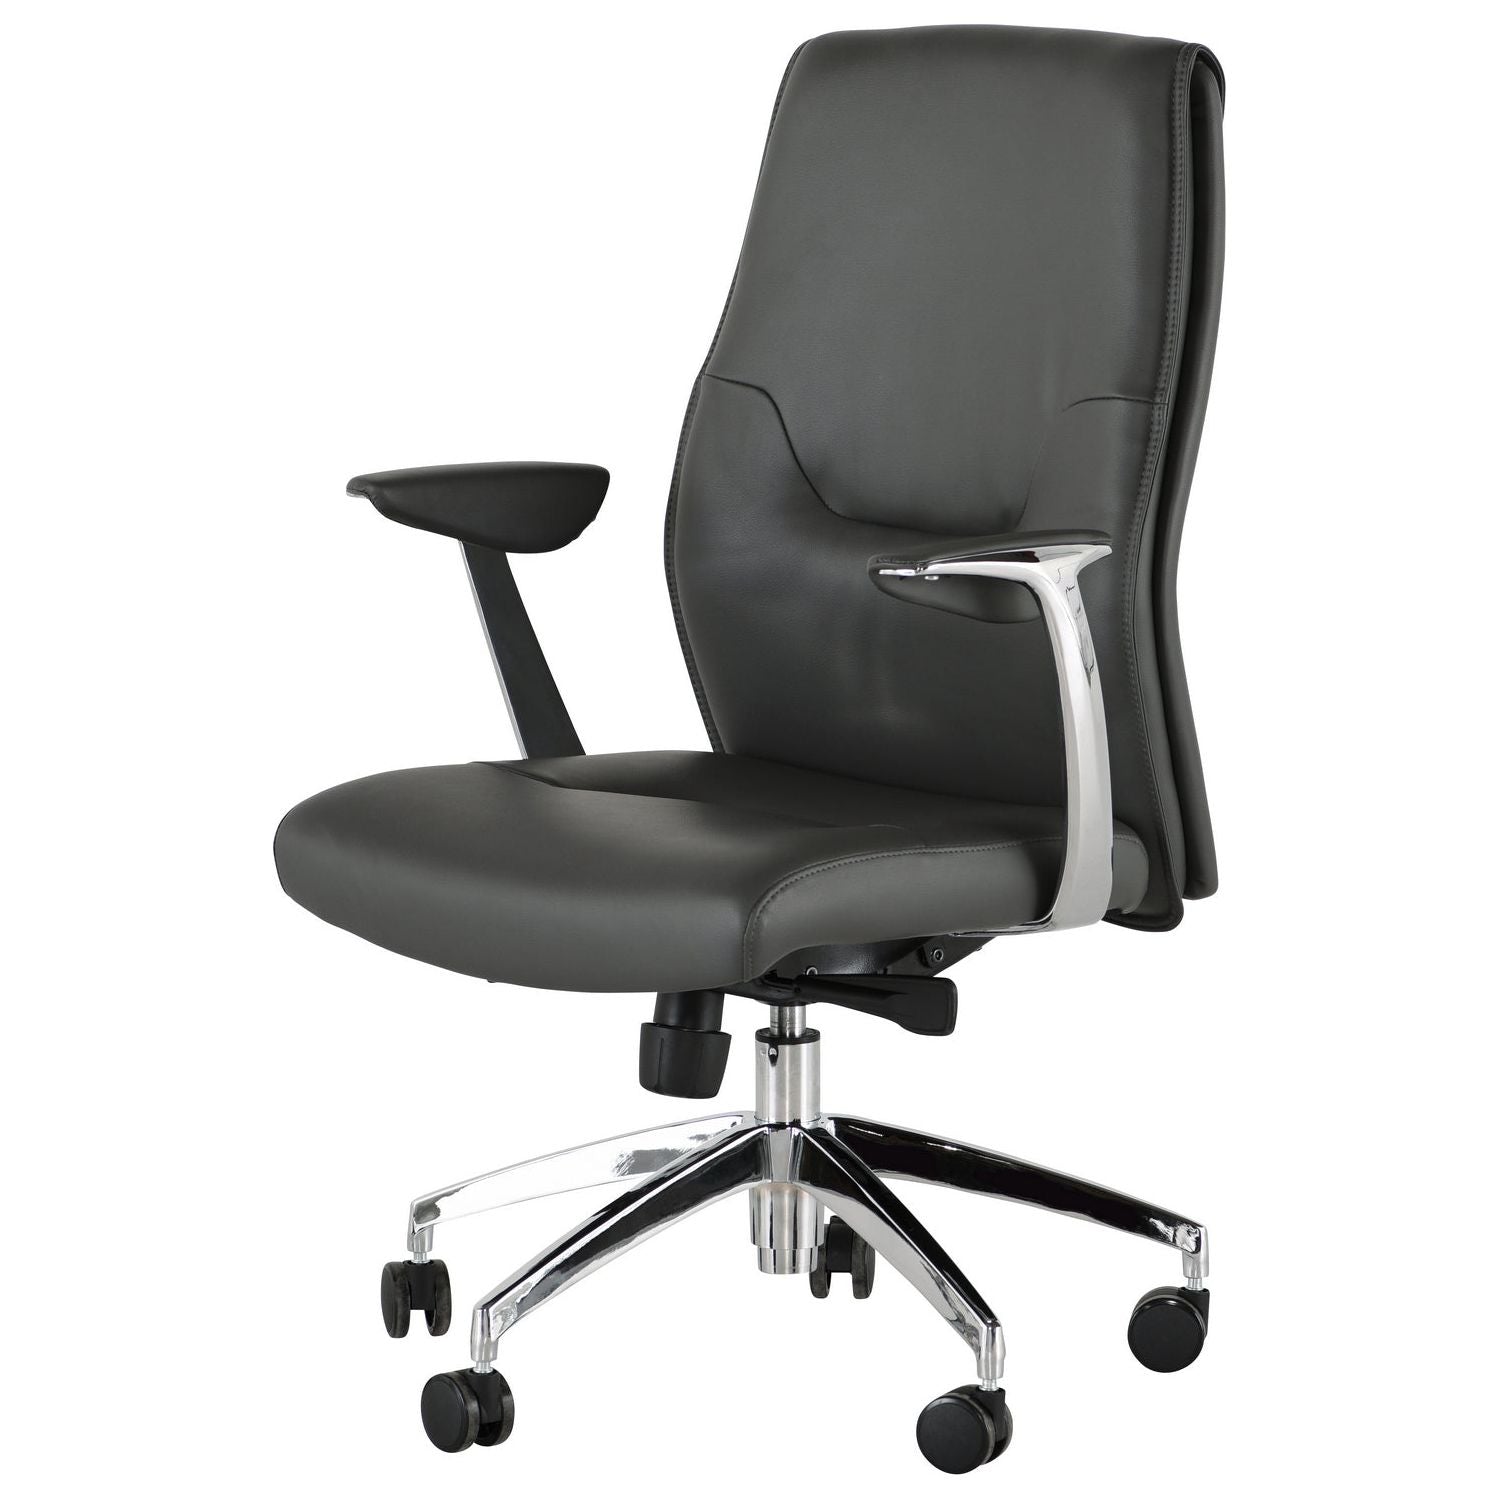 Nuevo Living - HGJL391 - Office Chair - Klause - Grey